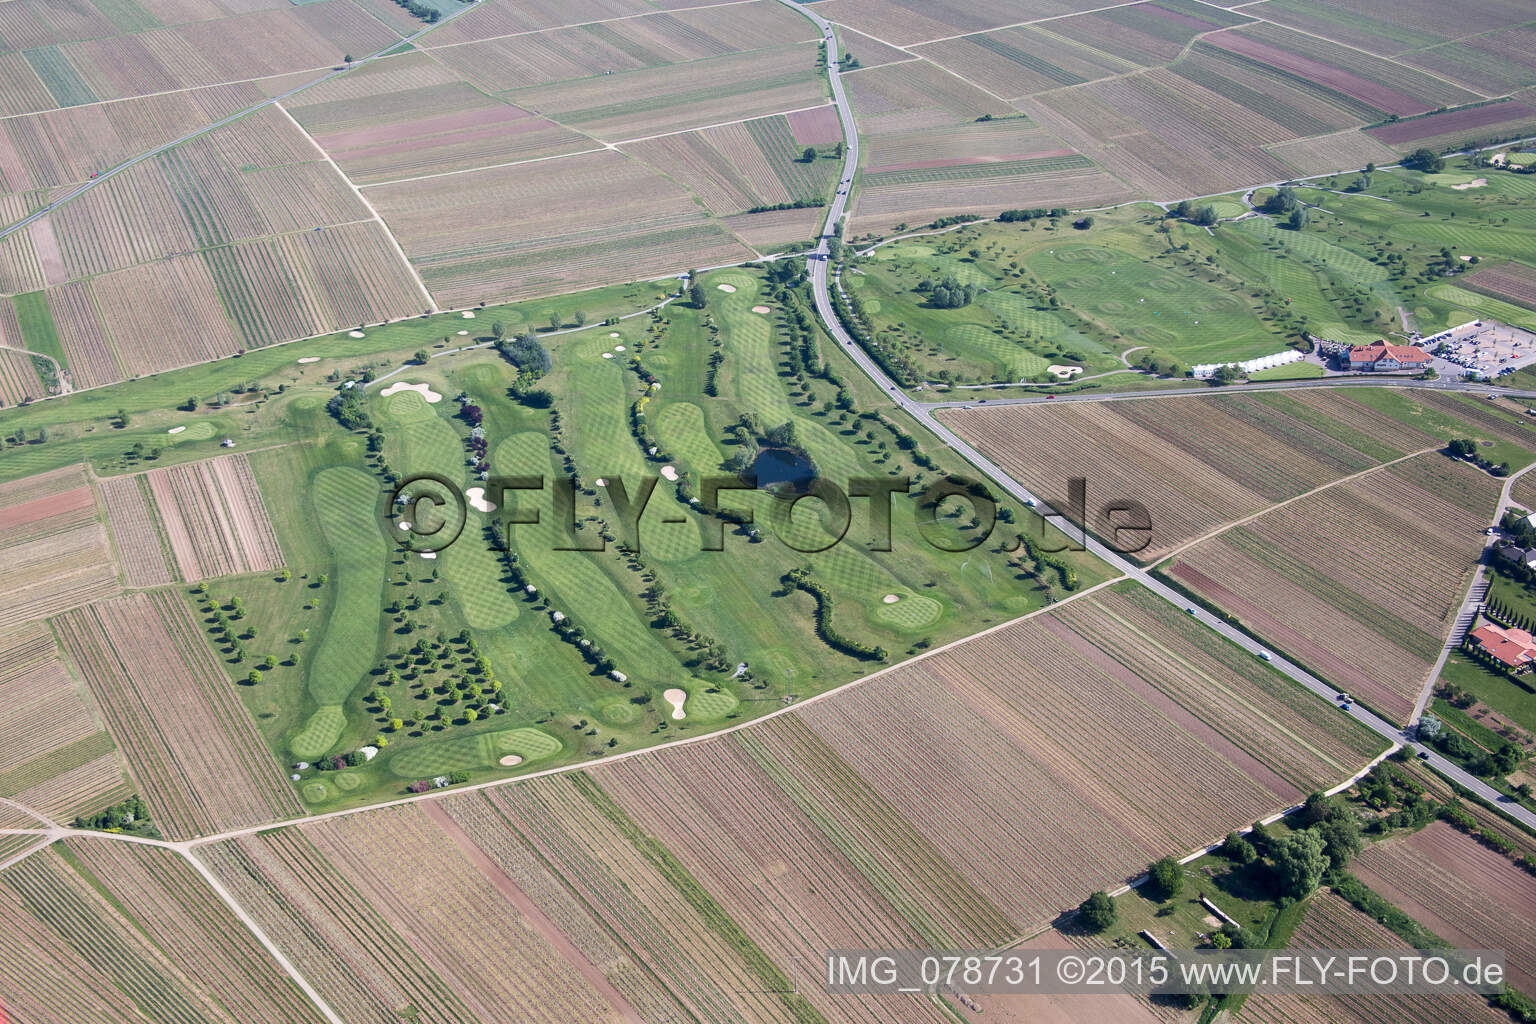 Oblique view of Golf course in Dackenheim in the state Rhineland-Palatinate, Germany